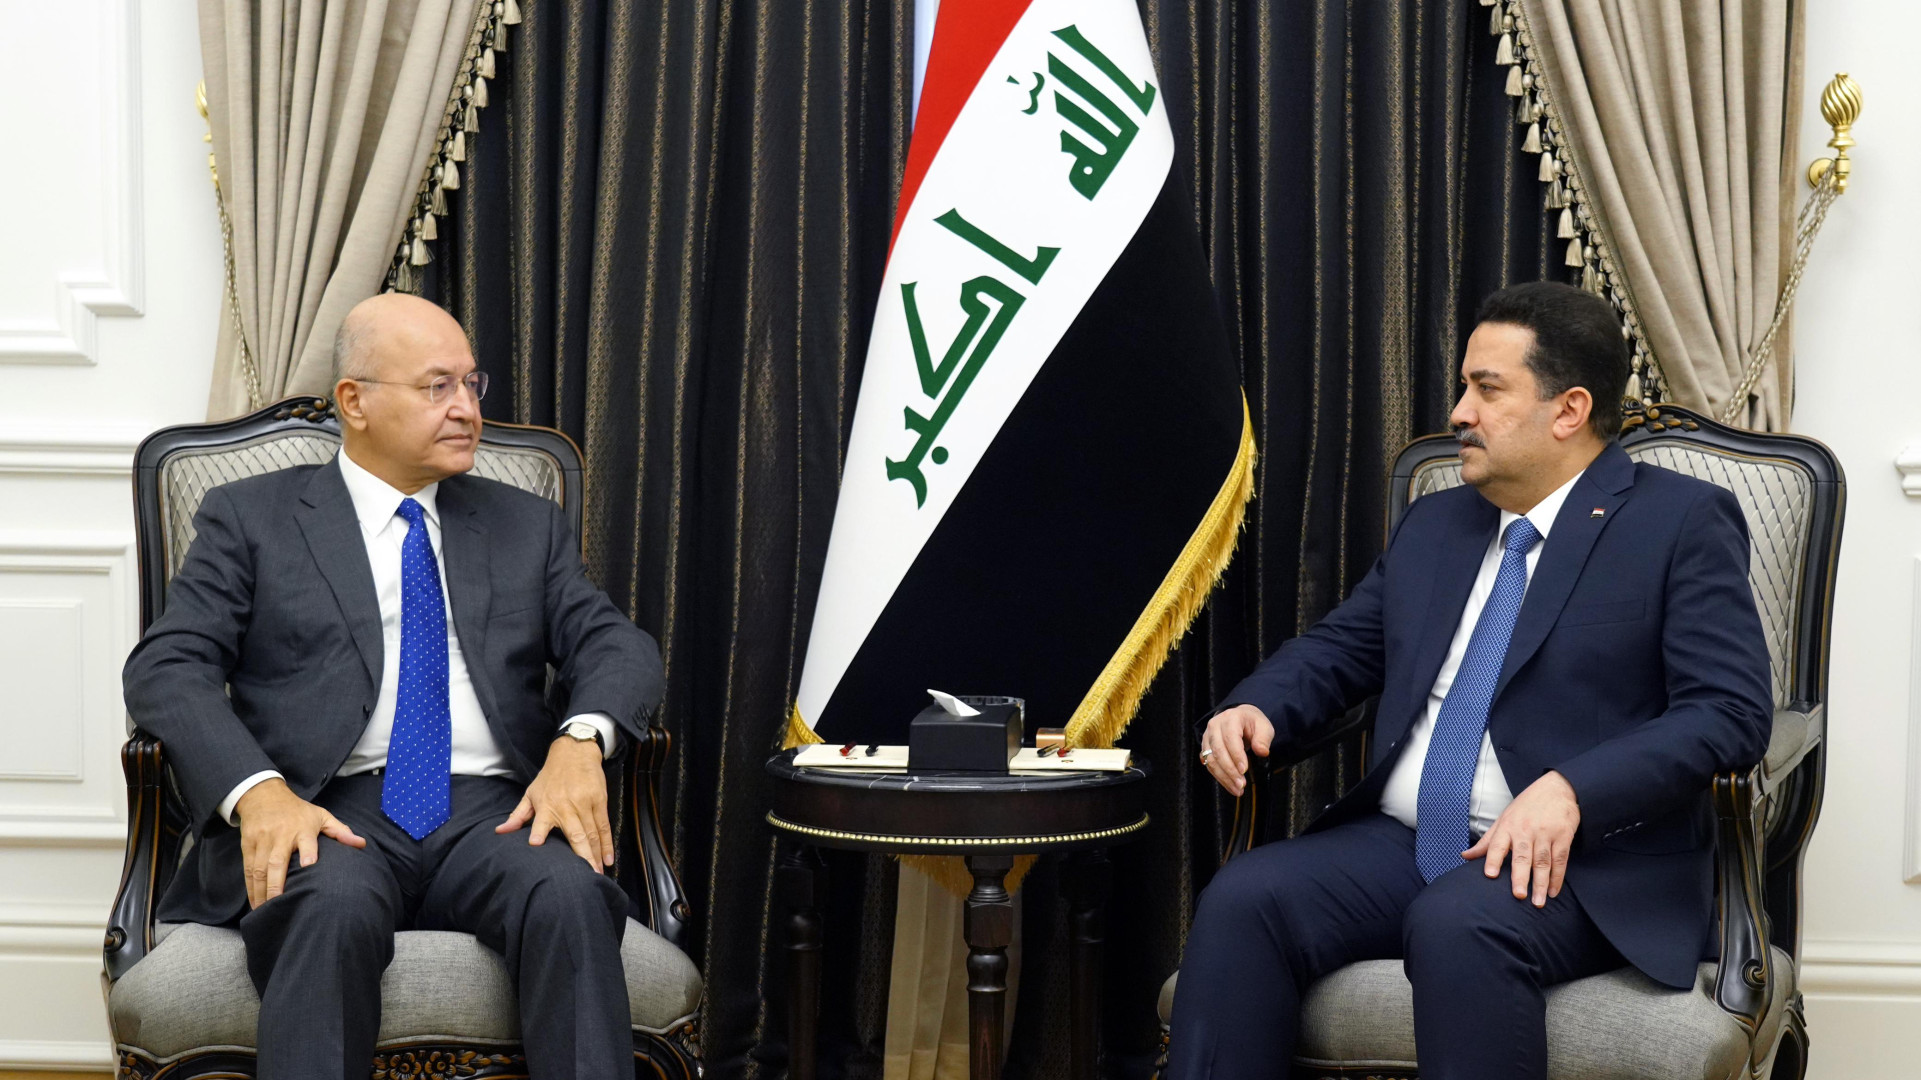 Al-Sudani discusses national matters with former President